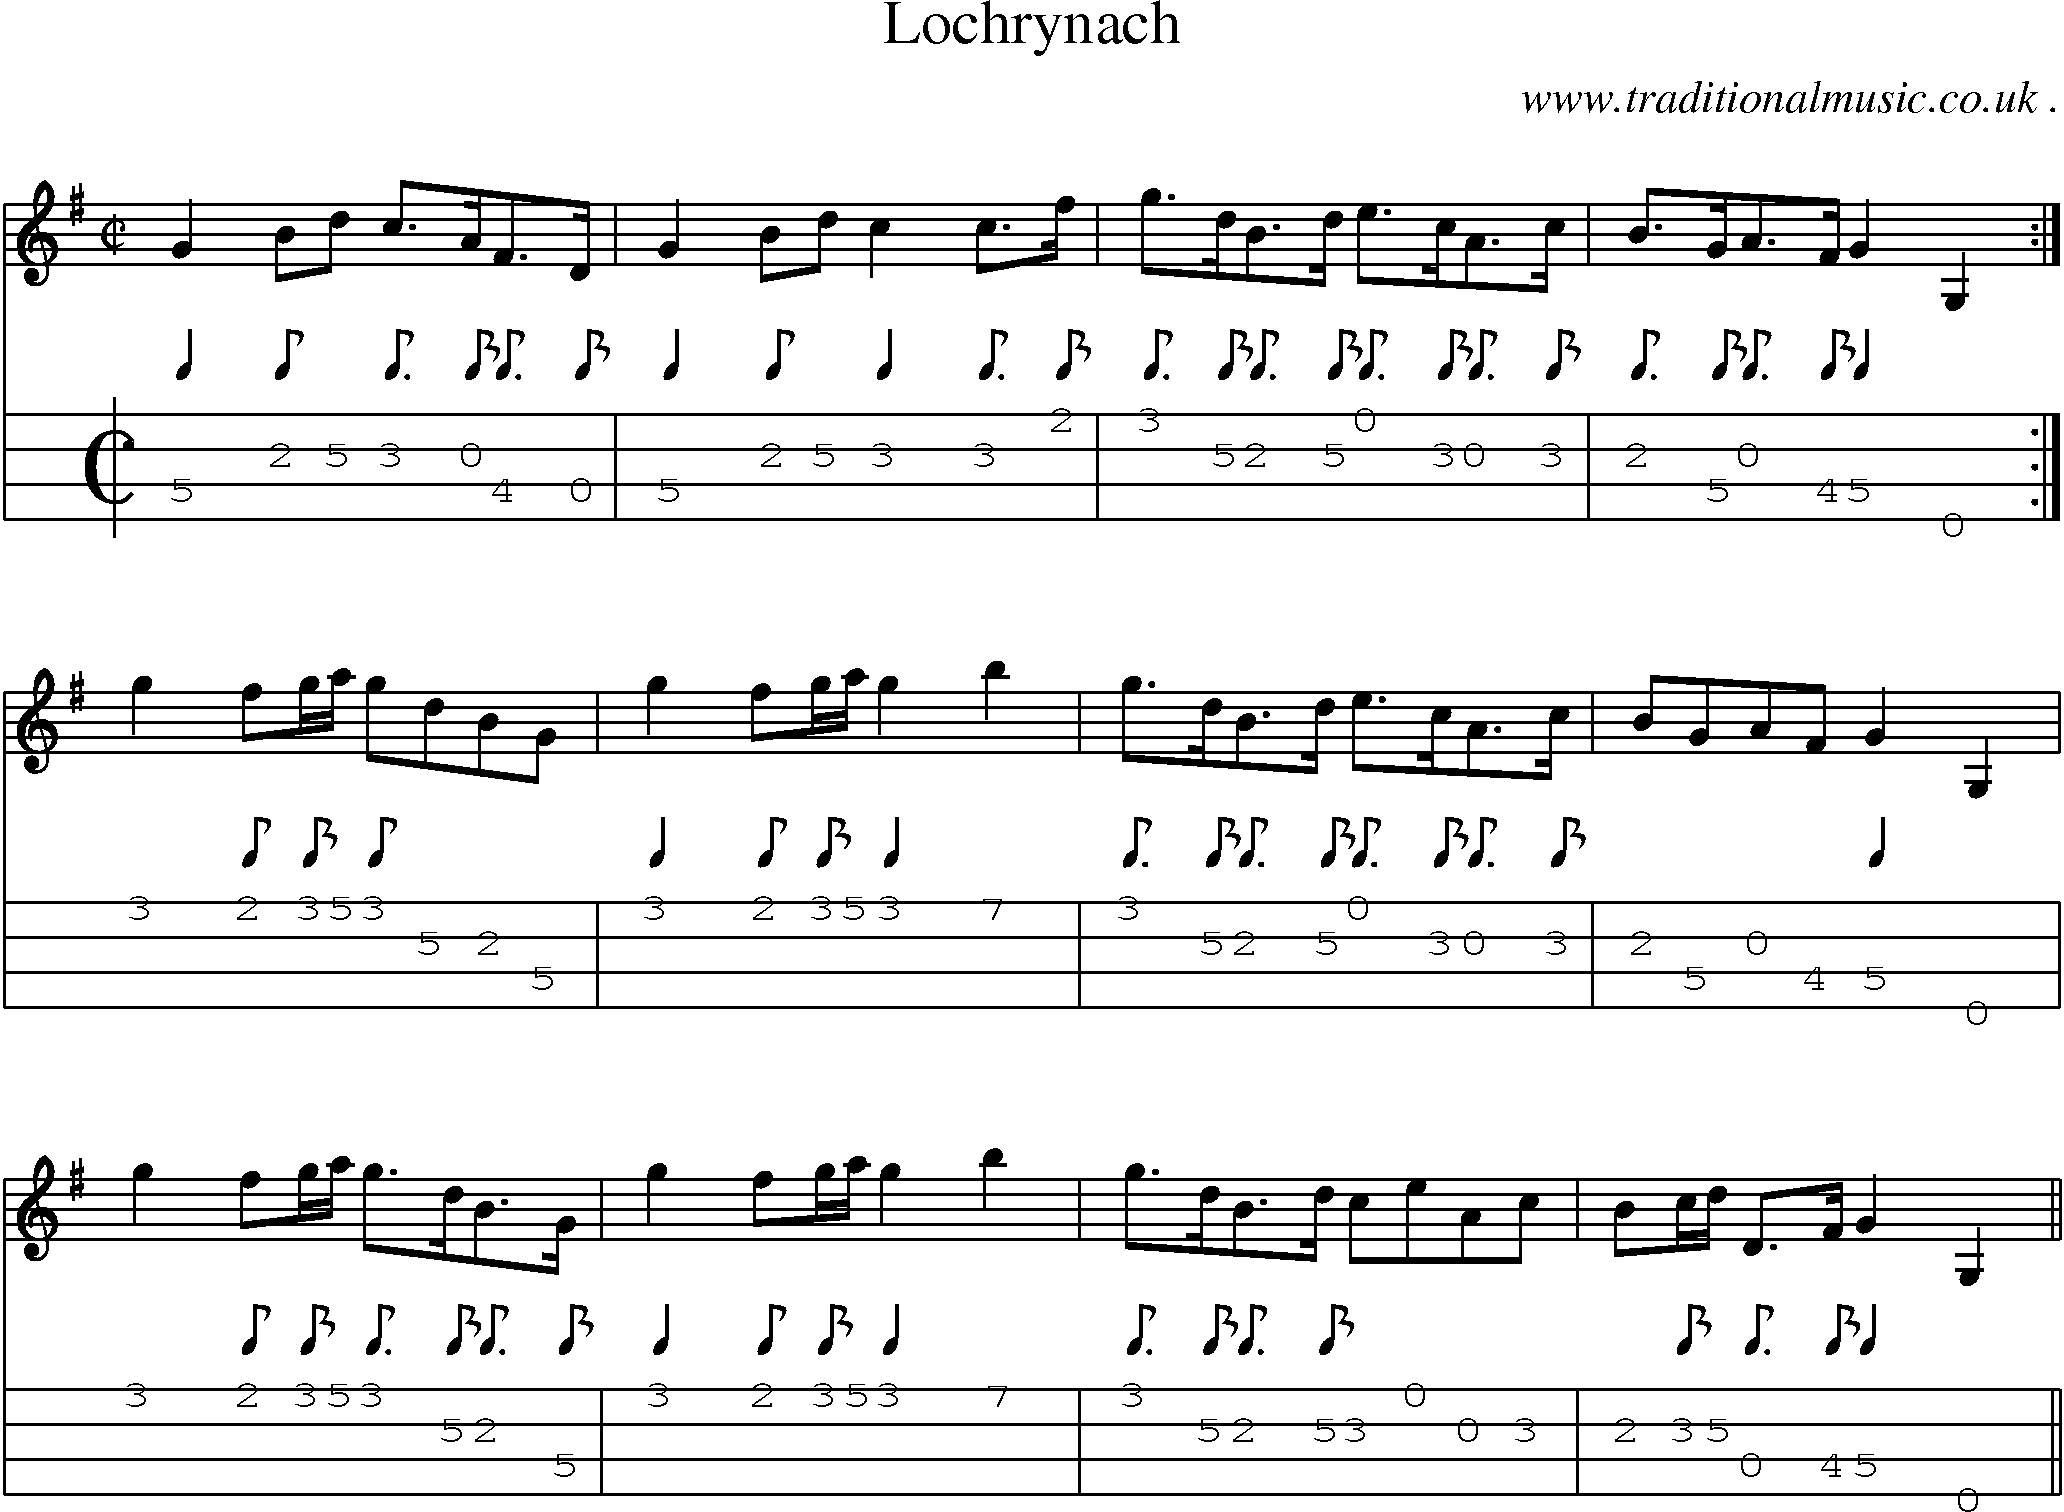 Sheet-music  score, Chords and Mandolin Tabs for Lochrynach